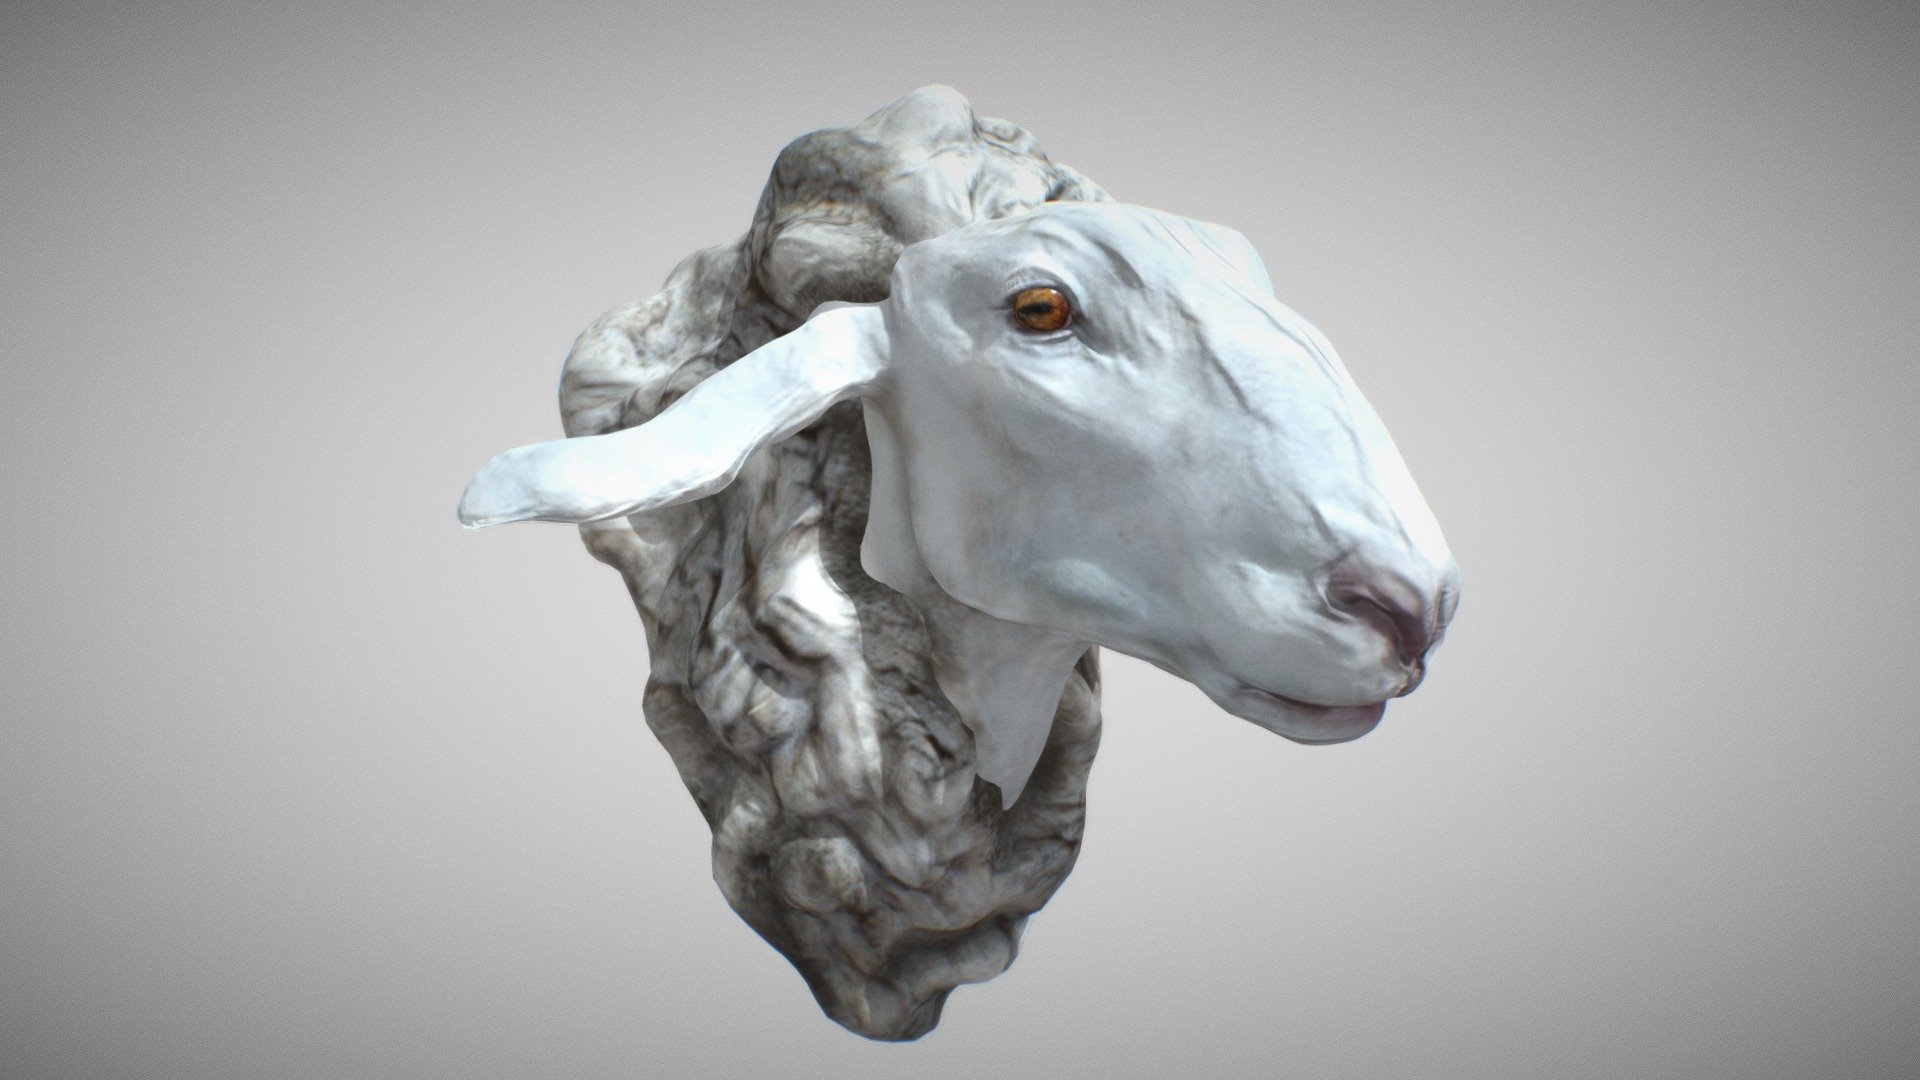 Sheep are quadrupedal, ruminant mammals typically kept as livestock. Being a key animal in the history of farming, sheep have a deeply entrenched place in human culture, and find representation in much modern language and symbology. As livestock, sheep are most often associated with pastoral imagery.

https://en.wikipedia.org/wiki/Sheep

A bust sculpted and polypaint textured in zbrush. A full body sculpt and manual retopo/UV coming soon.

see more of my work on my website and instagram:

https://www.tomjohnsonart.co.uk/

https://www.instagram.com/tomjohnsonart/ - Sheep - Buy Royalty Free 3D model by Tom Johnson (@Brigyon) 3d model